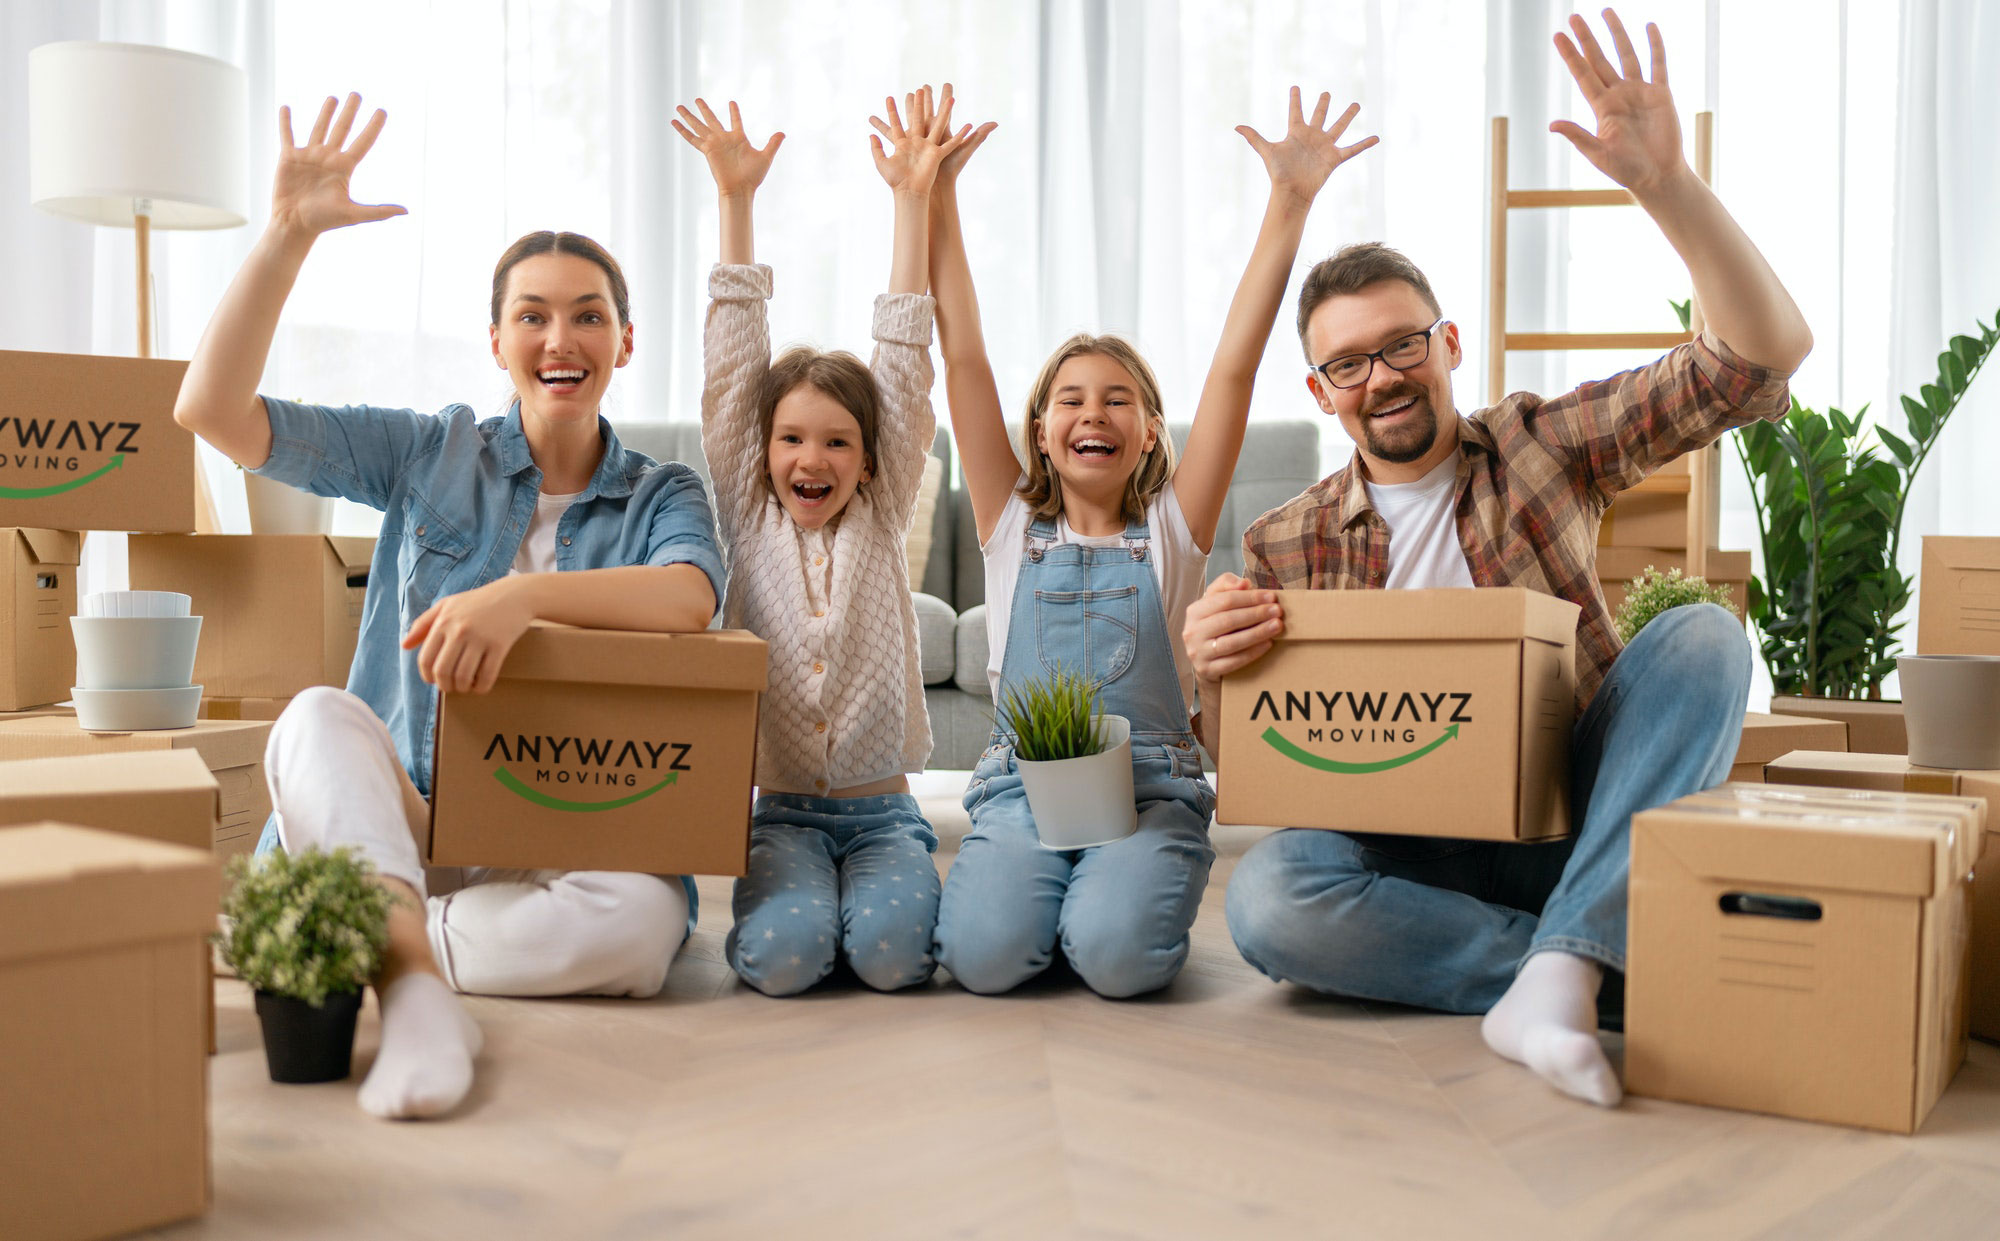 Anywayz Moving - Los Angeles Moving Company